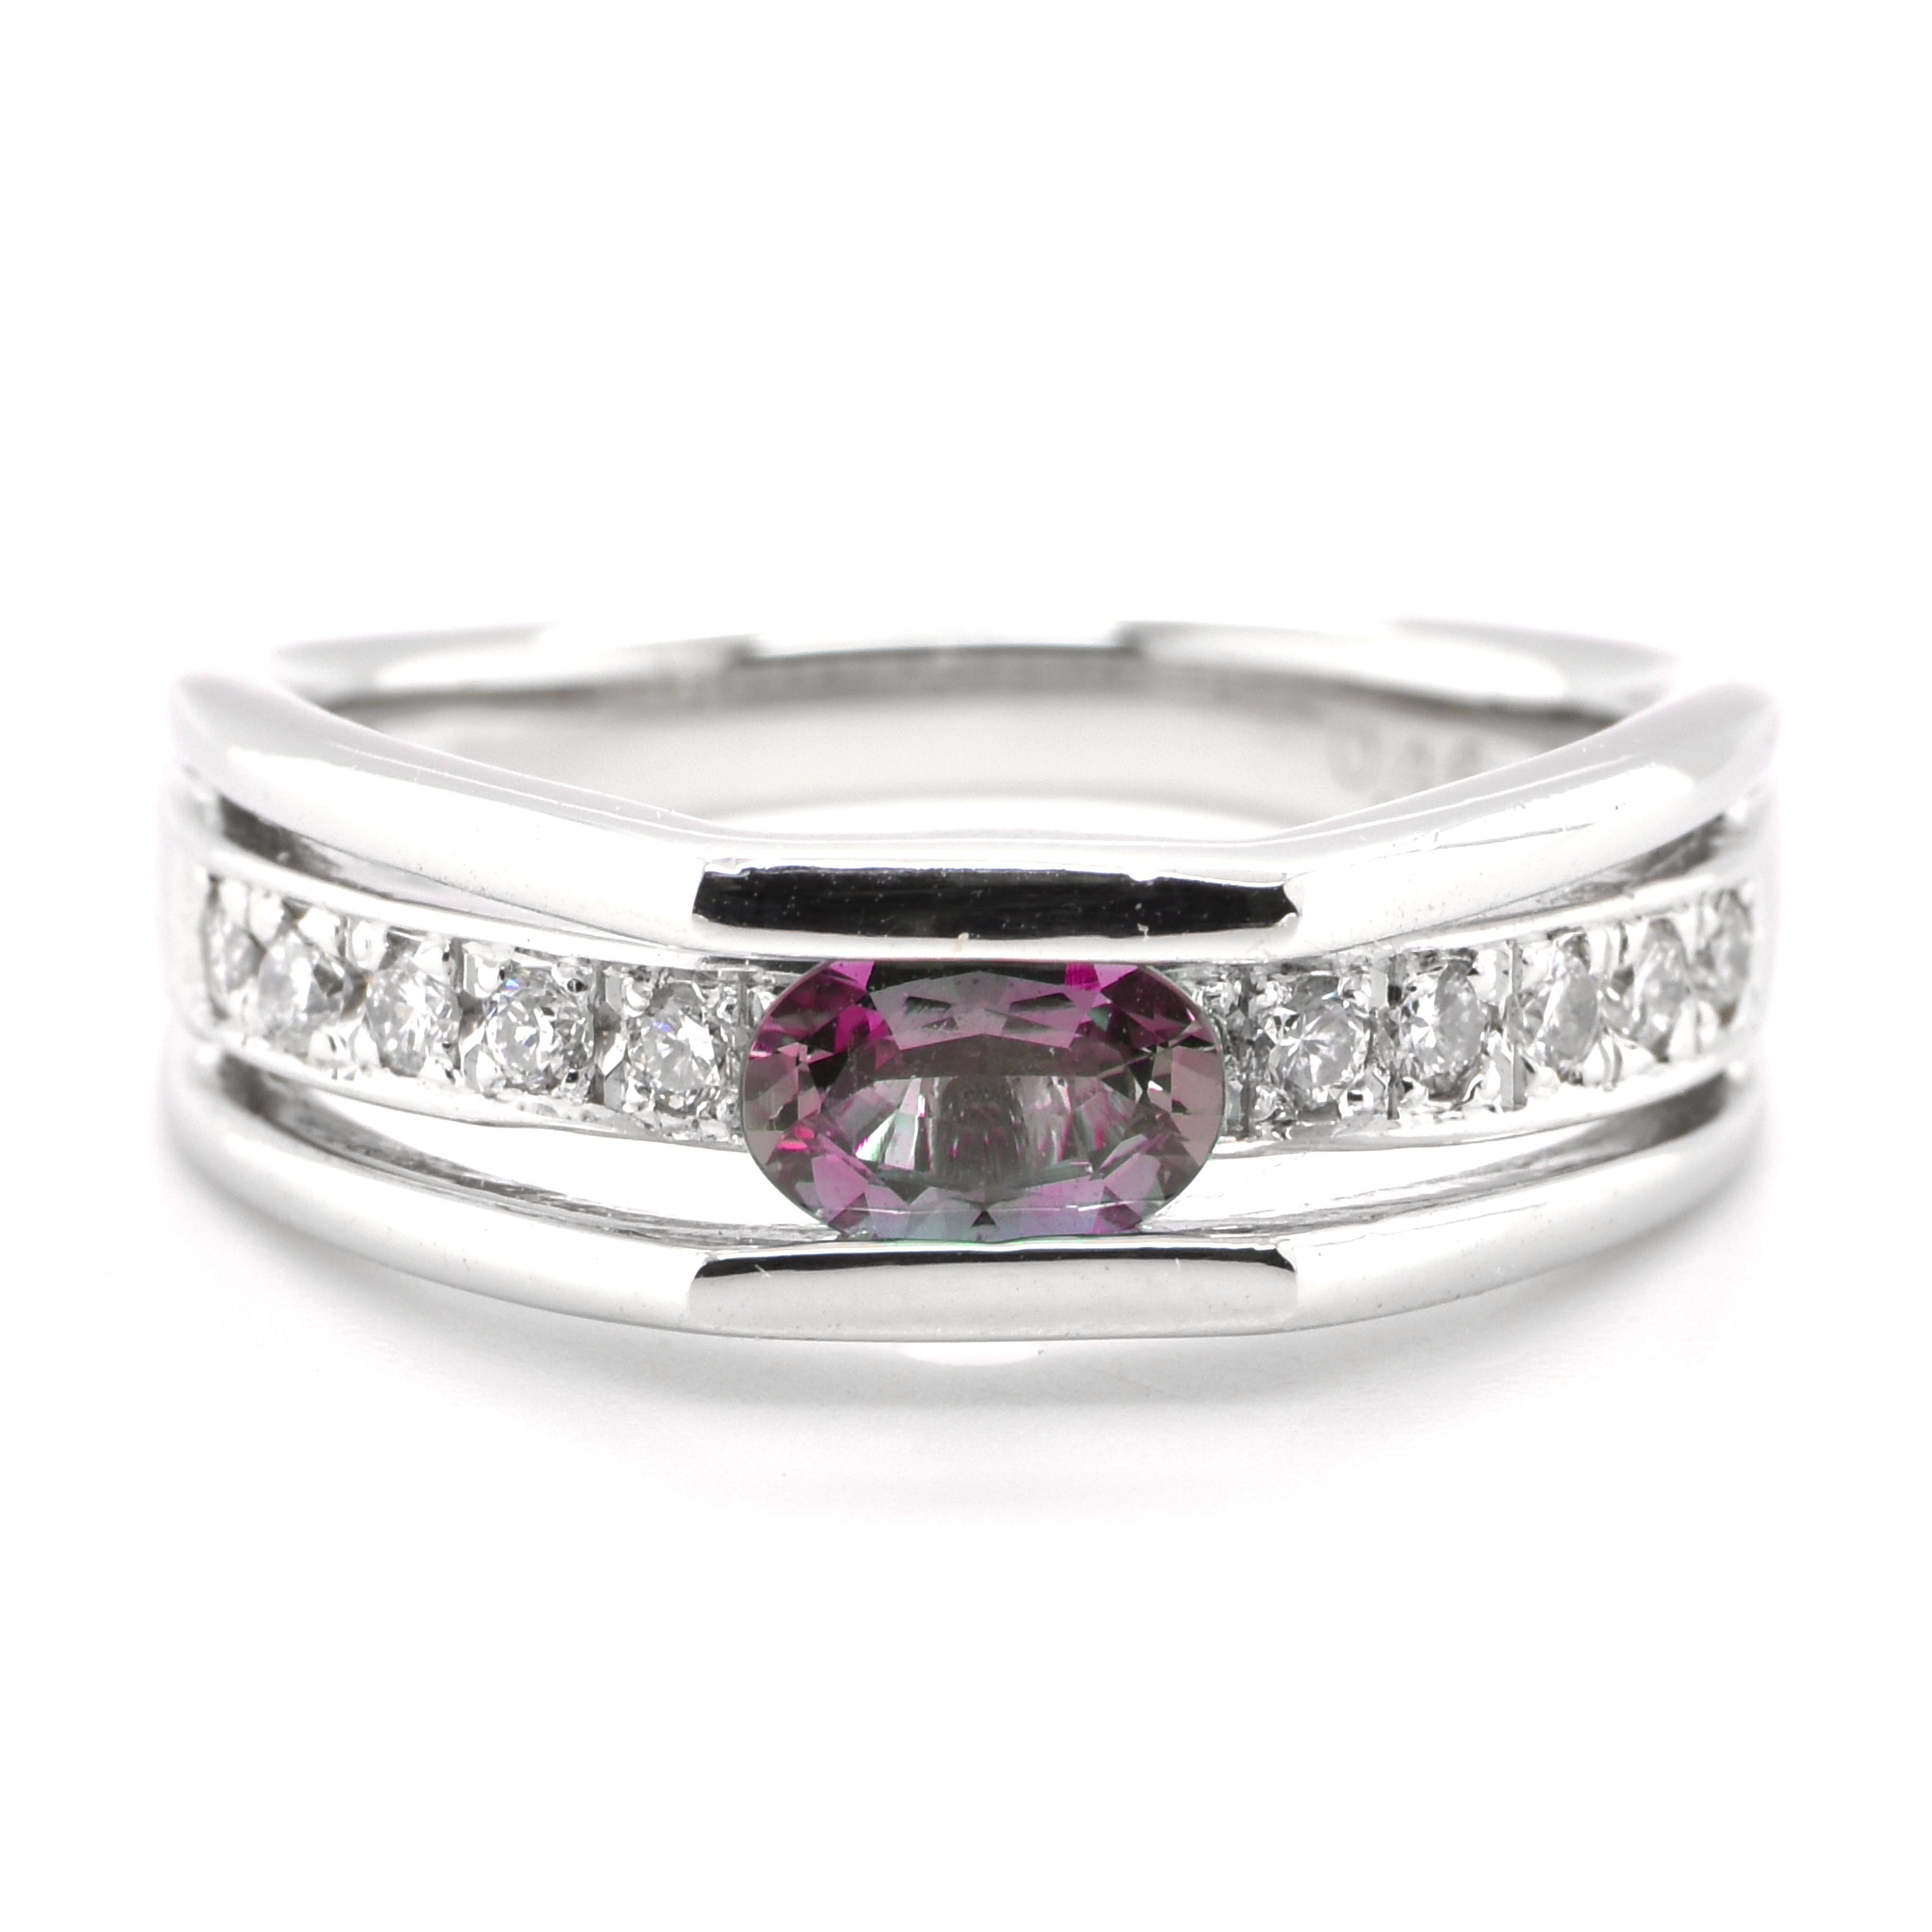 A gorgeous ring featuring a 0.46 Carat, Natural Alexandrite and 0.25 Carats of Diamond Accents set in Platinum. Alexandrites produce a natural color-change phenomenon as they exhibit a Bluish Green Color under Fluorescent Light whereas a Purplish